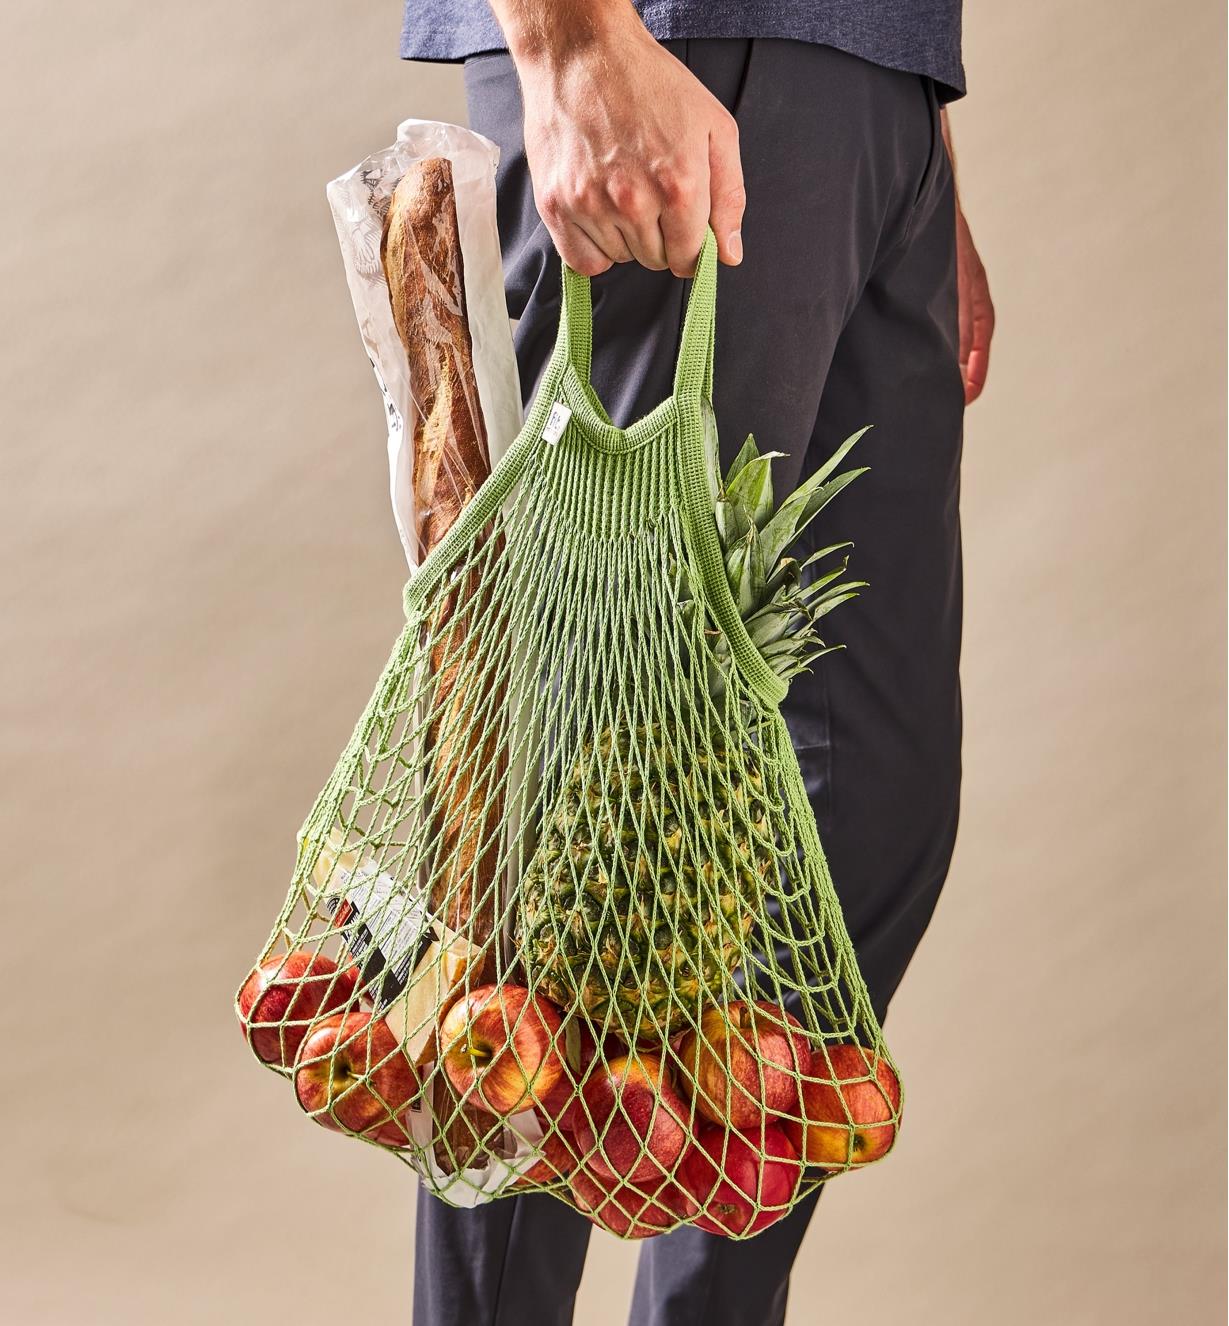 A person carrying by hand the green short-handled mesh shopping bag filled with groceries